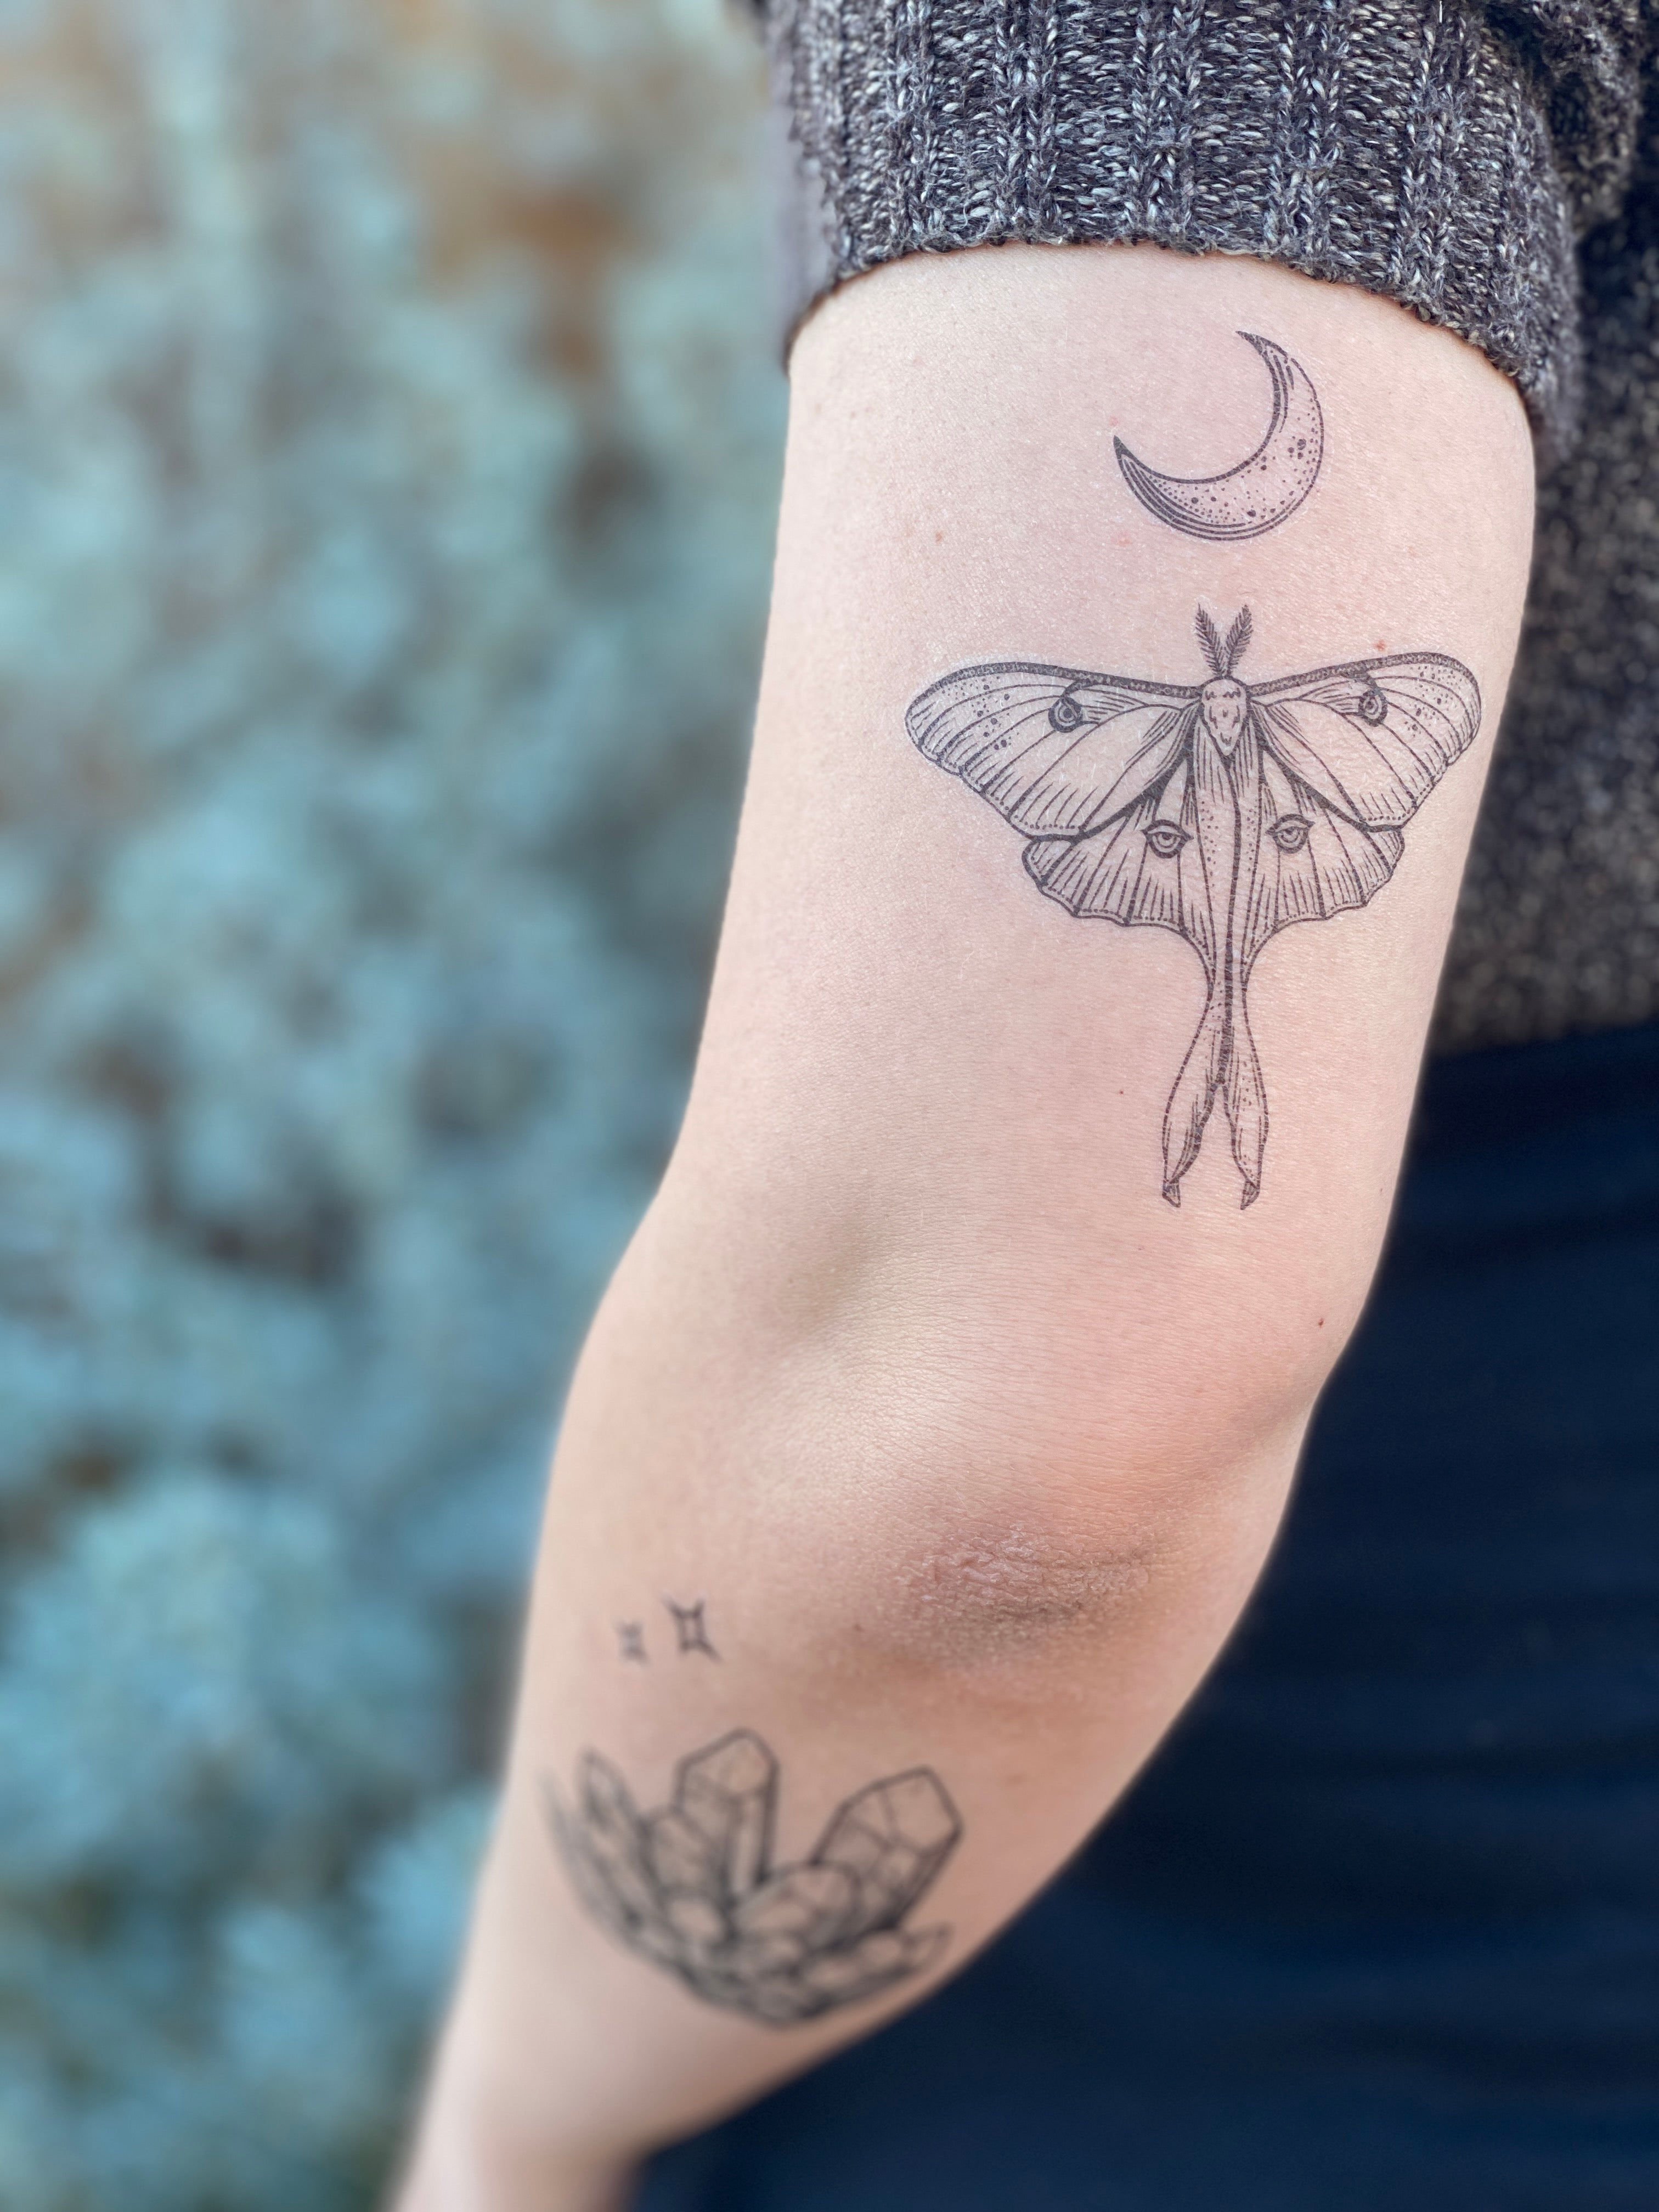 Buy Luna Moth Temporary Tattoo Black Line Tattoo Winged Insect Online in  India  Etsy